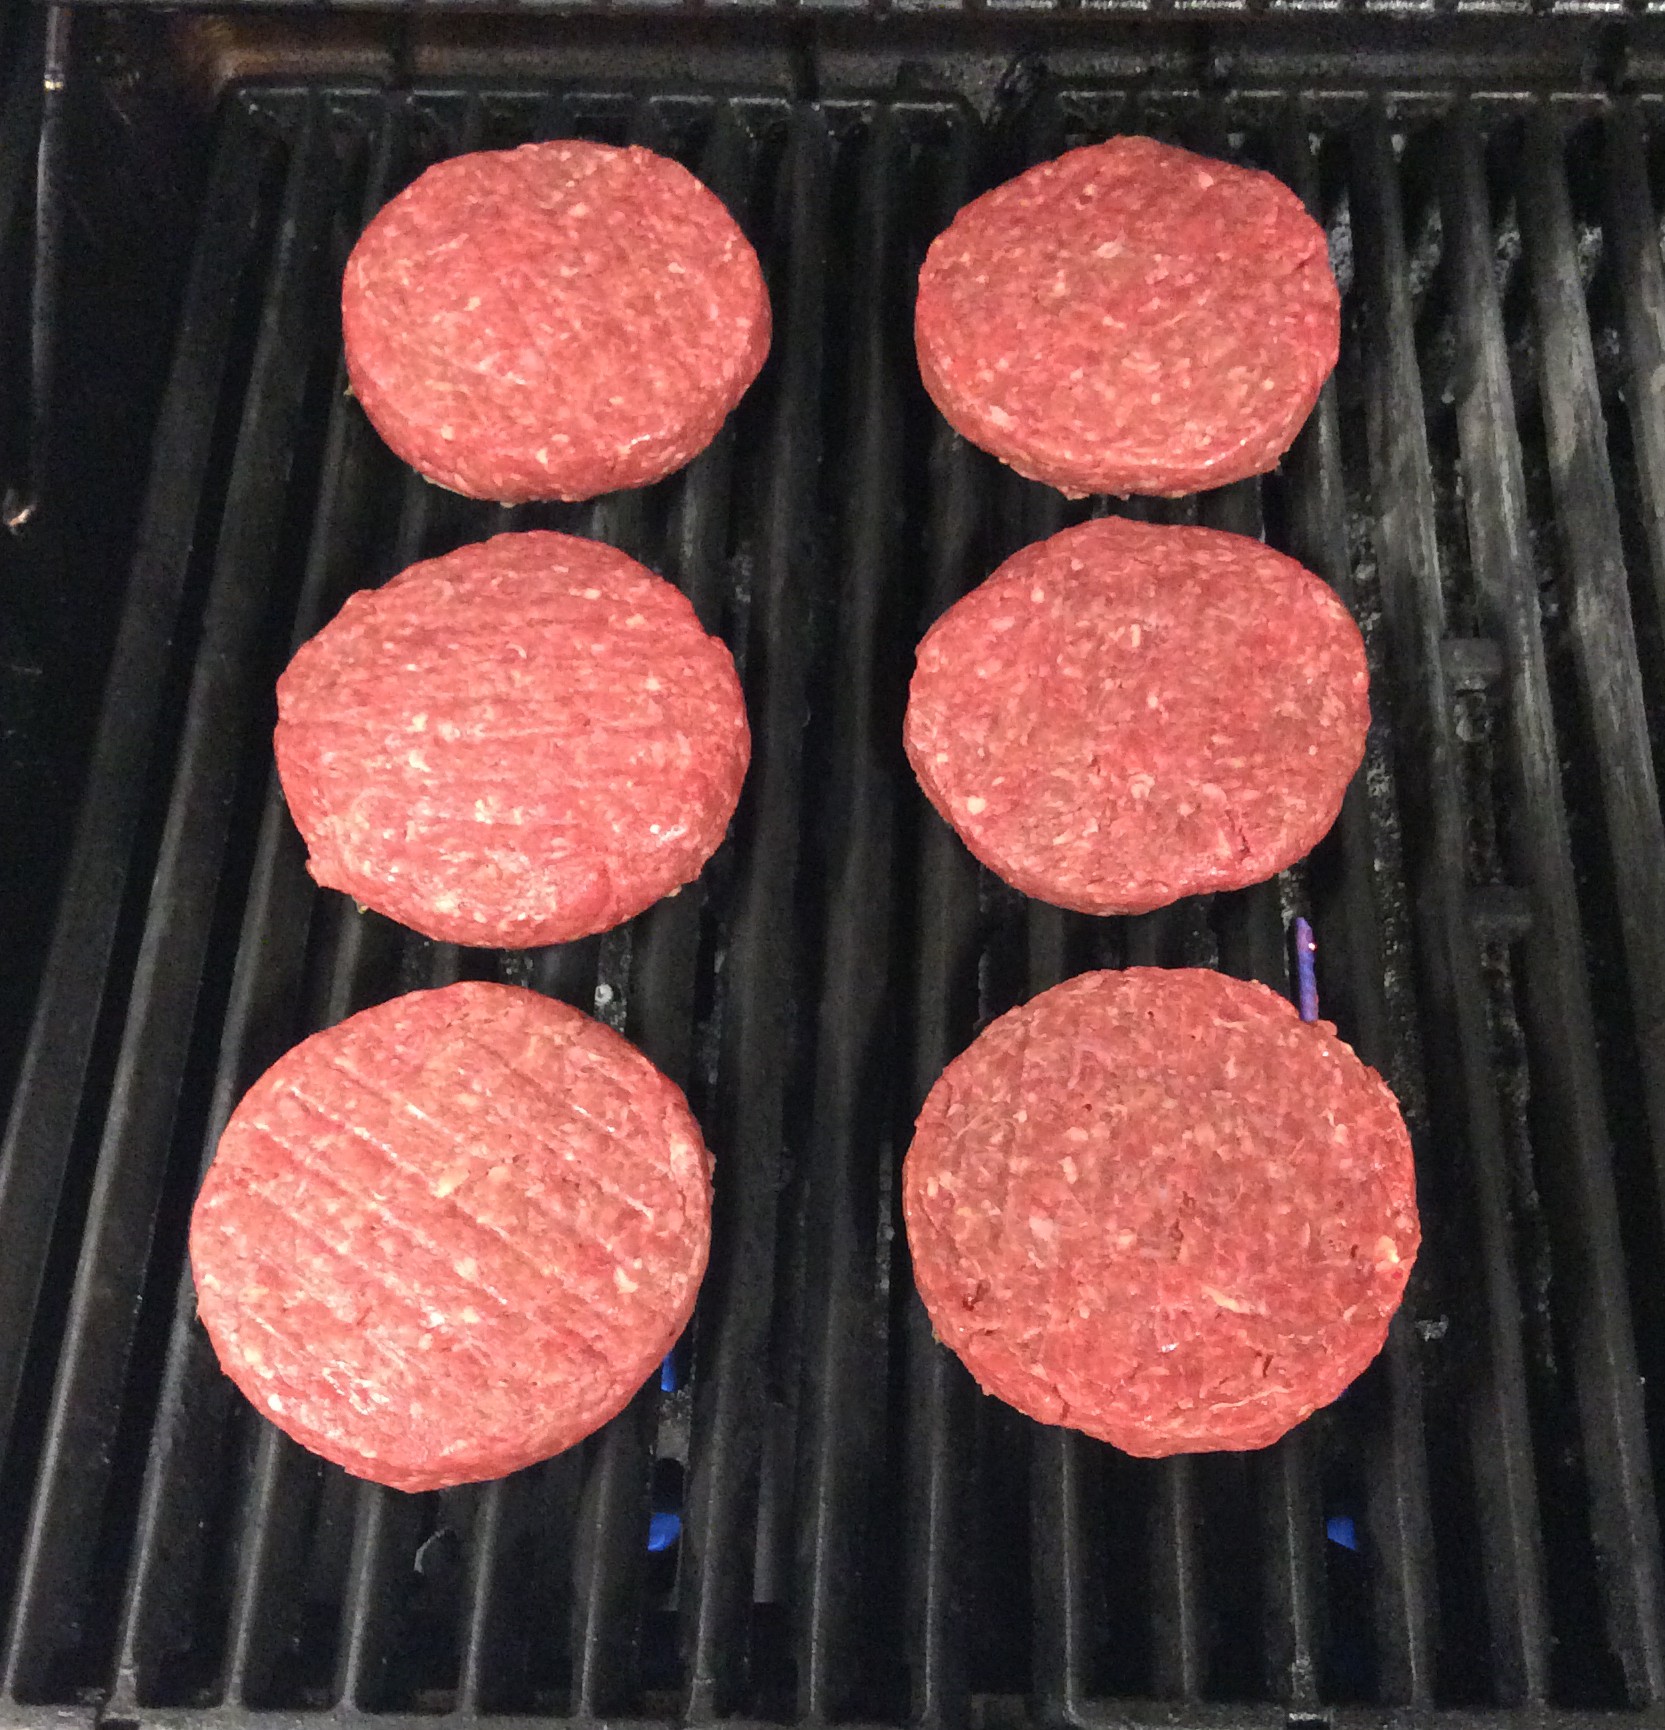 Put the stuffed burgers on the grill